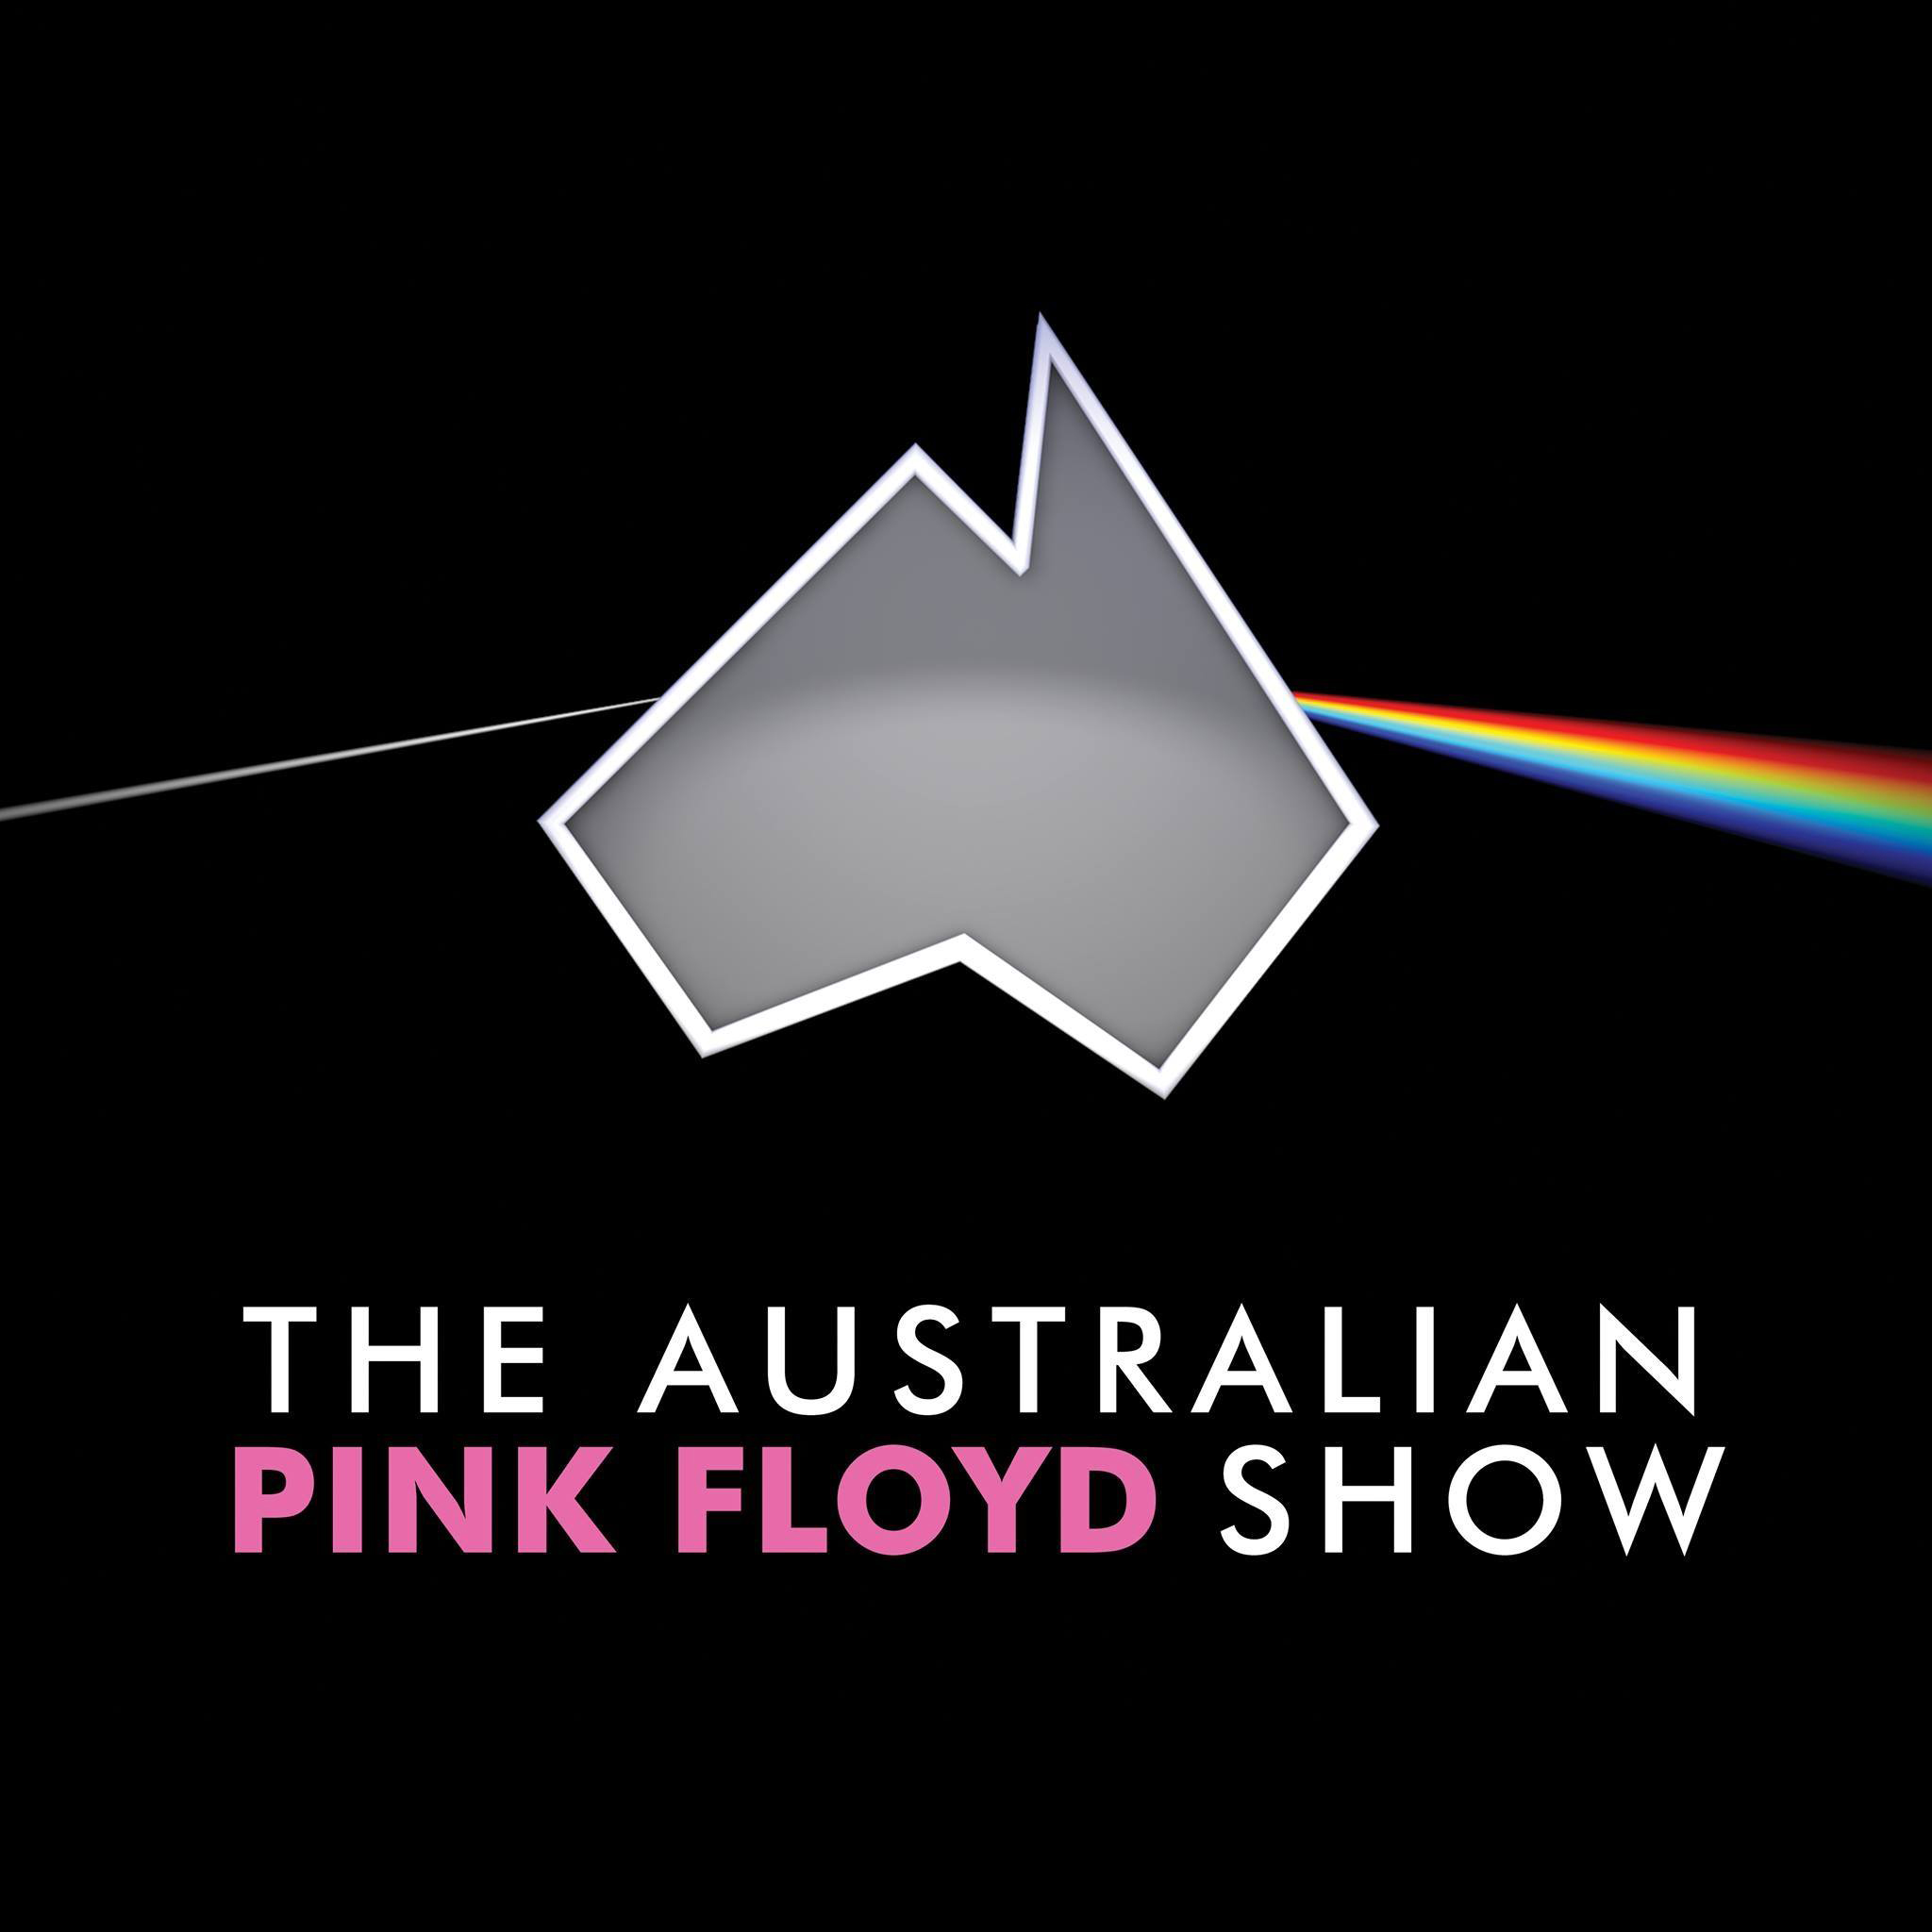 THE AUSTRALIAN PINK FLOYD SHOW is coming to Belfast & Dublin next year 2